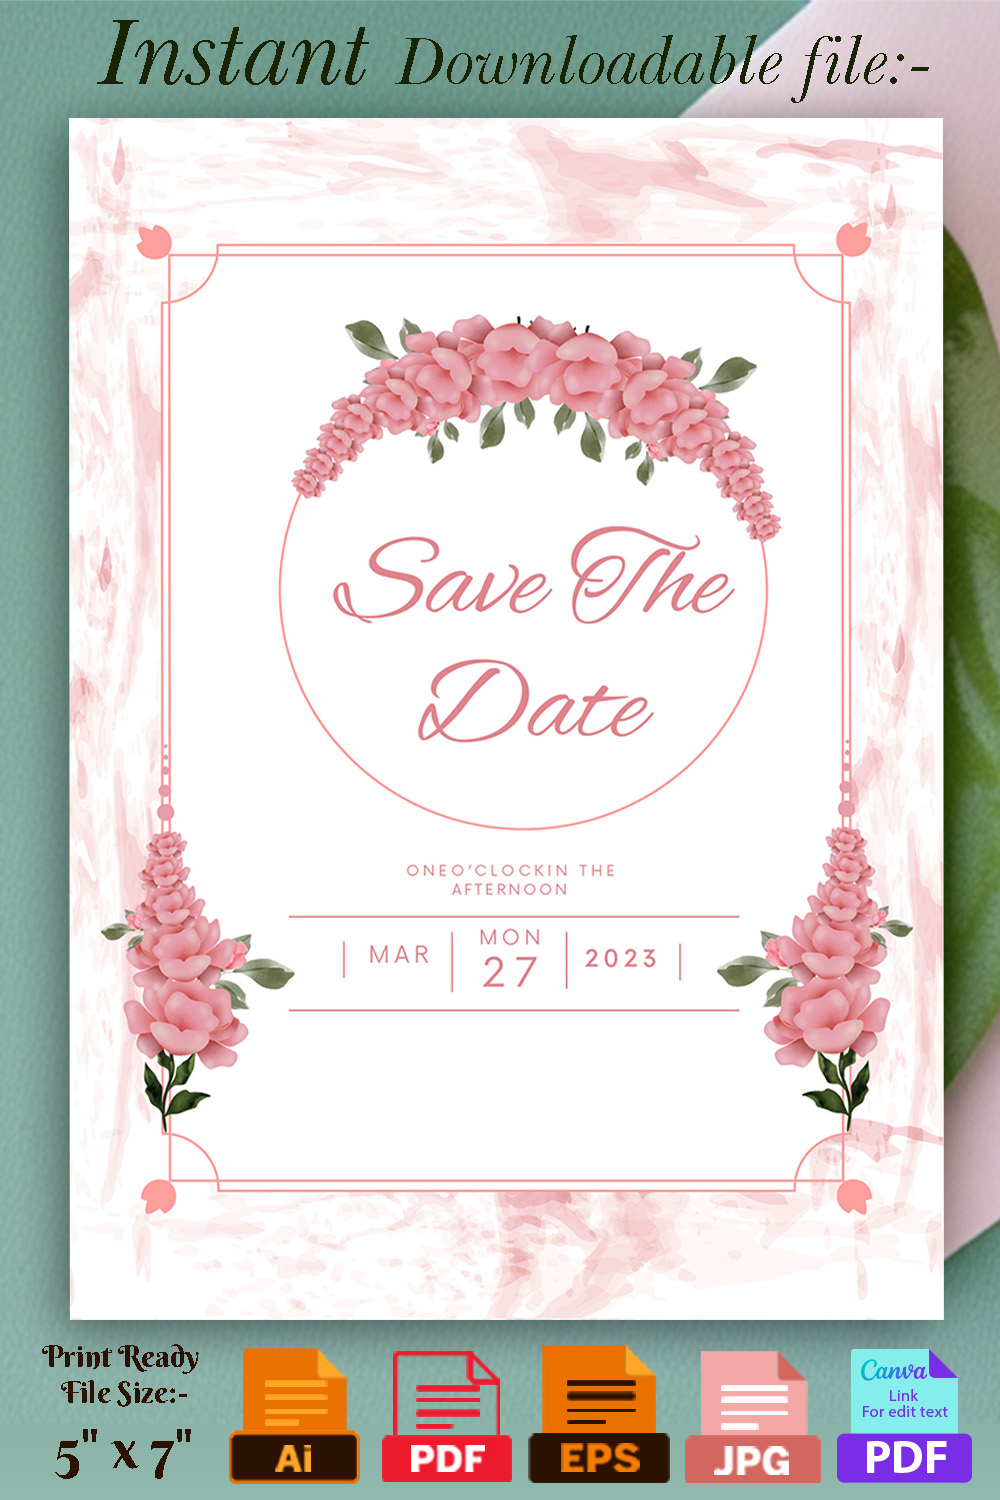 Image with gorgeous wedding invitation card in pink tones and flowers.